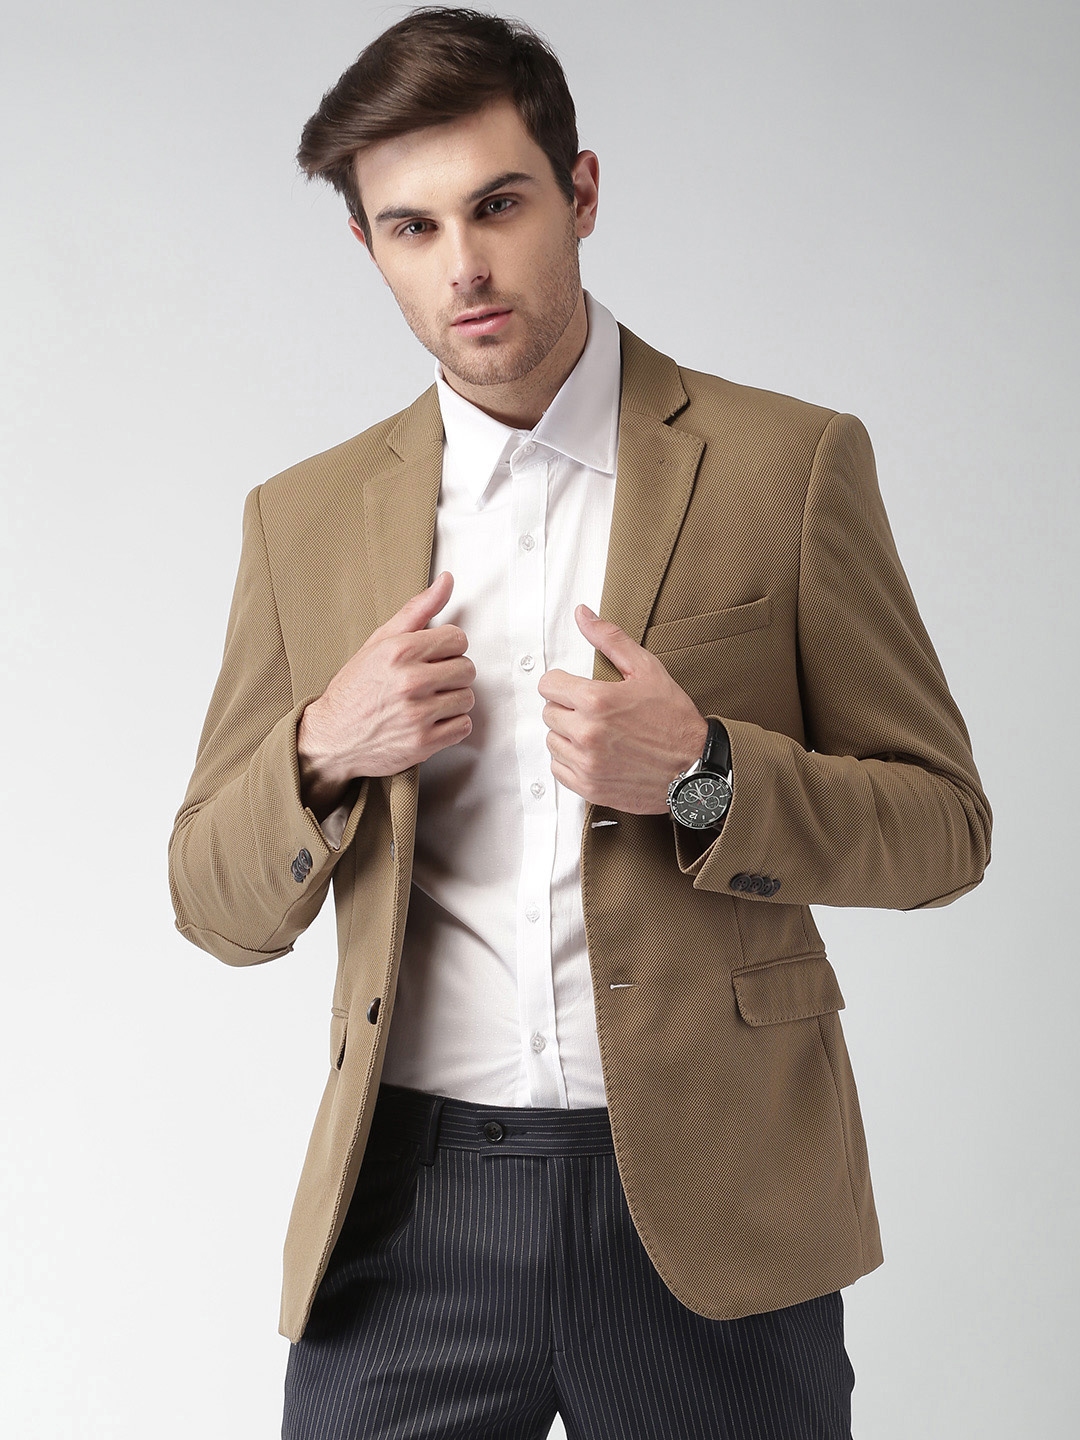 Update 78+ brown sports jacket latest - in.thdonghoadian